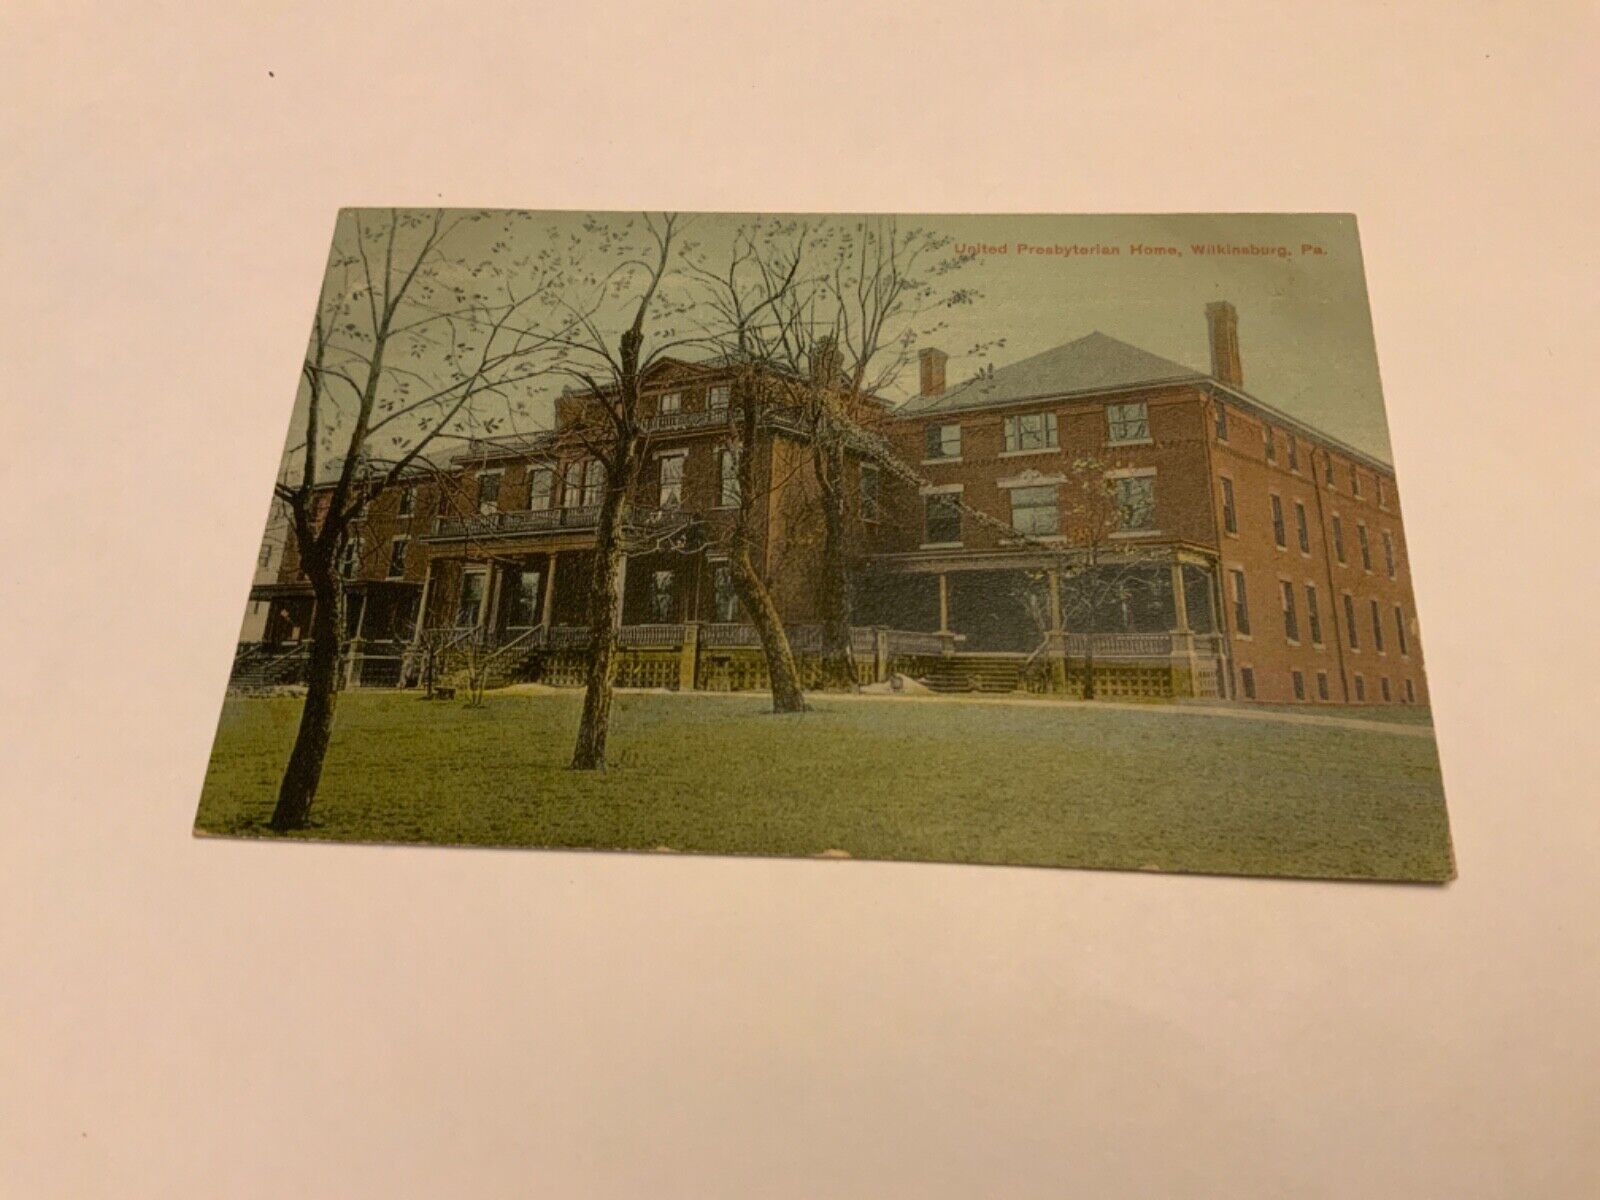 Wilkinsburg, Pa. ~ United Presbyterian Home - 1911 Antique Stamped  Postcard